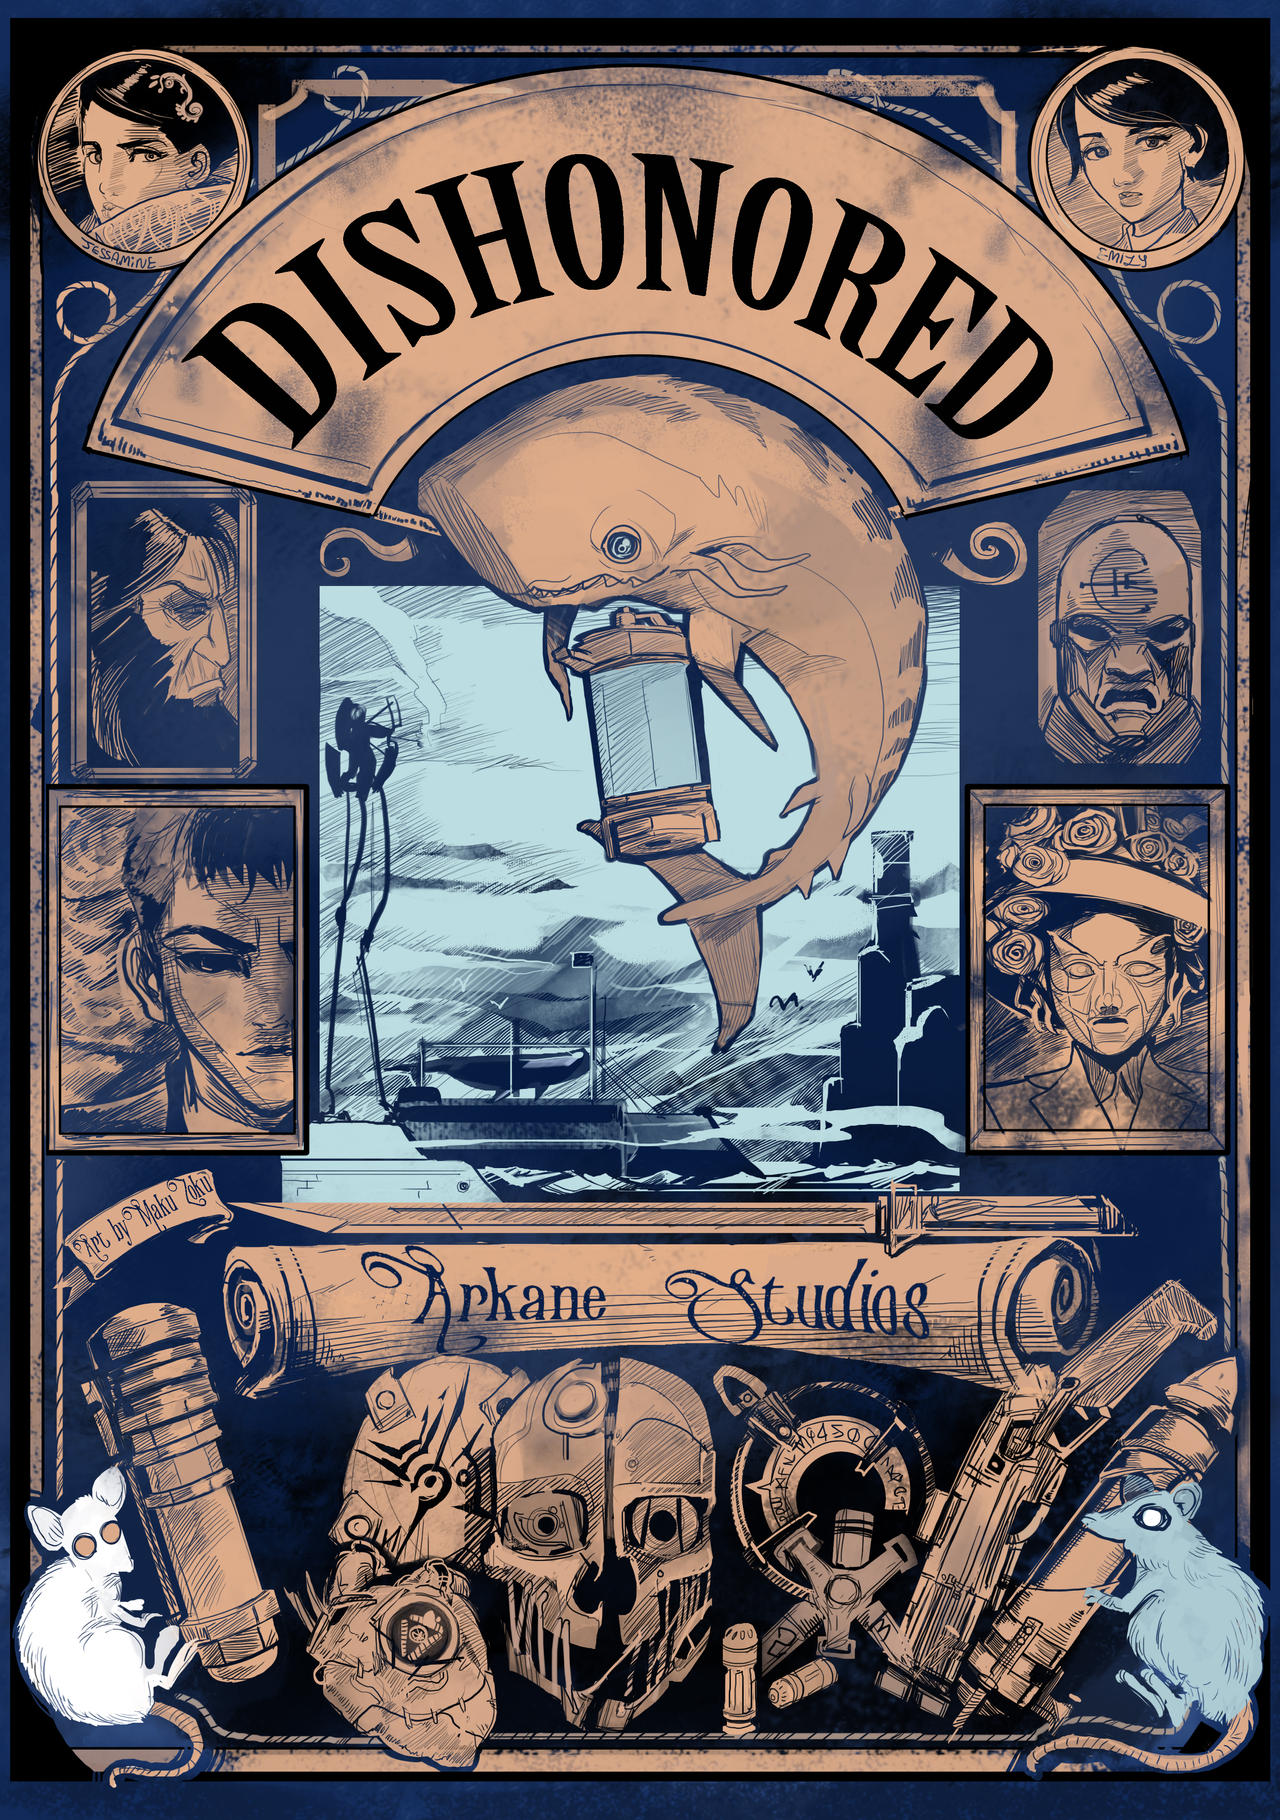 Dishonored Jules Verne Style